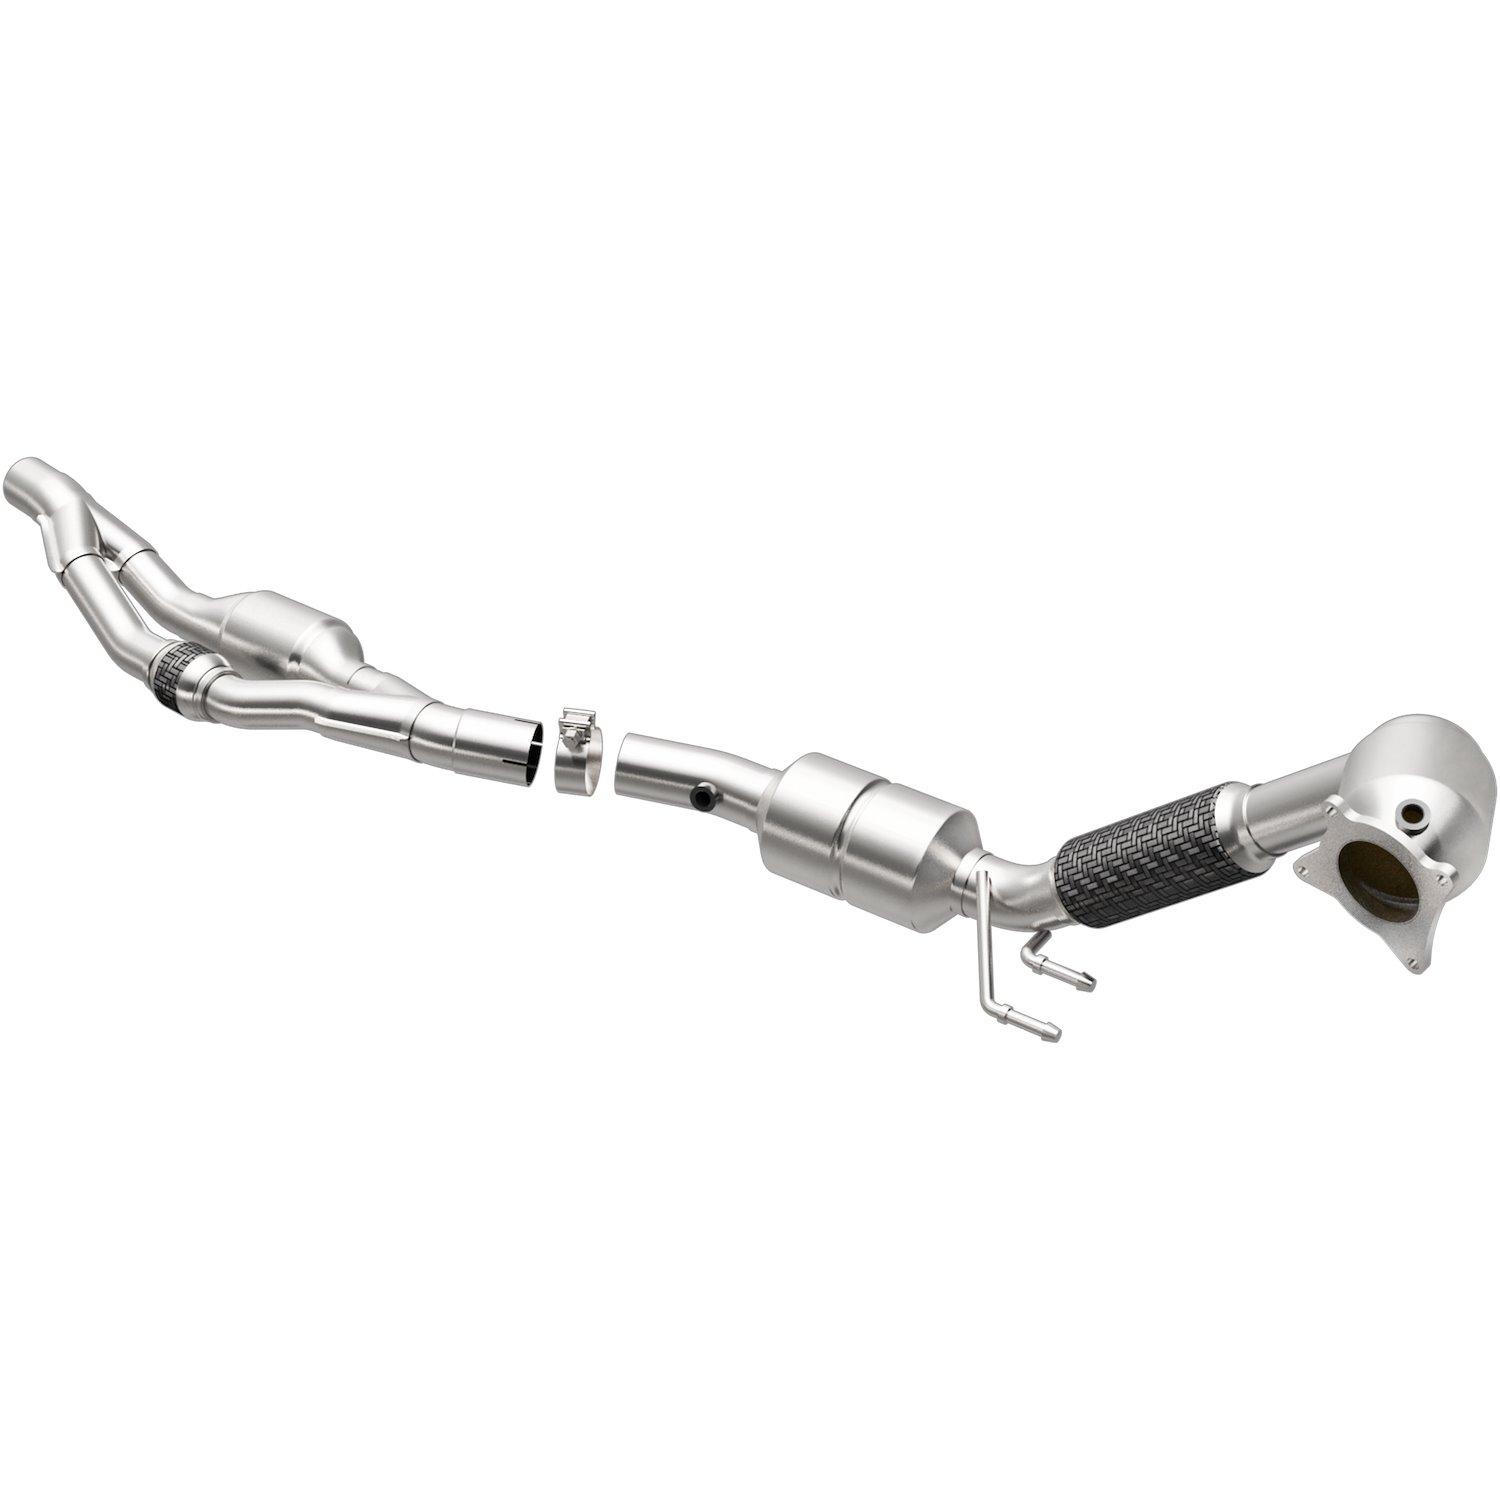 OEM Grade Federal / EPA Compliant Direct-Fit Catalytic Converter 49715